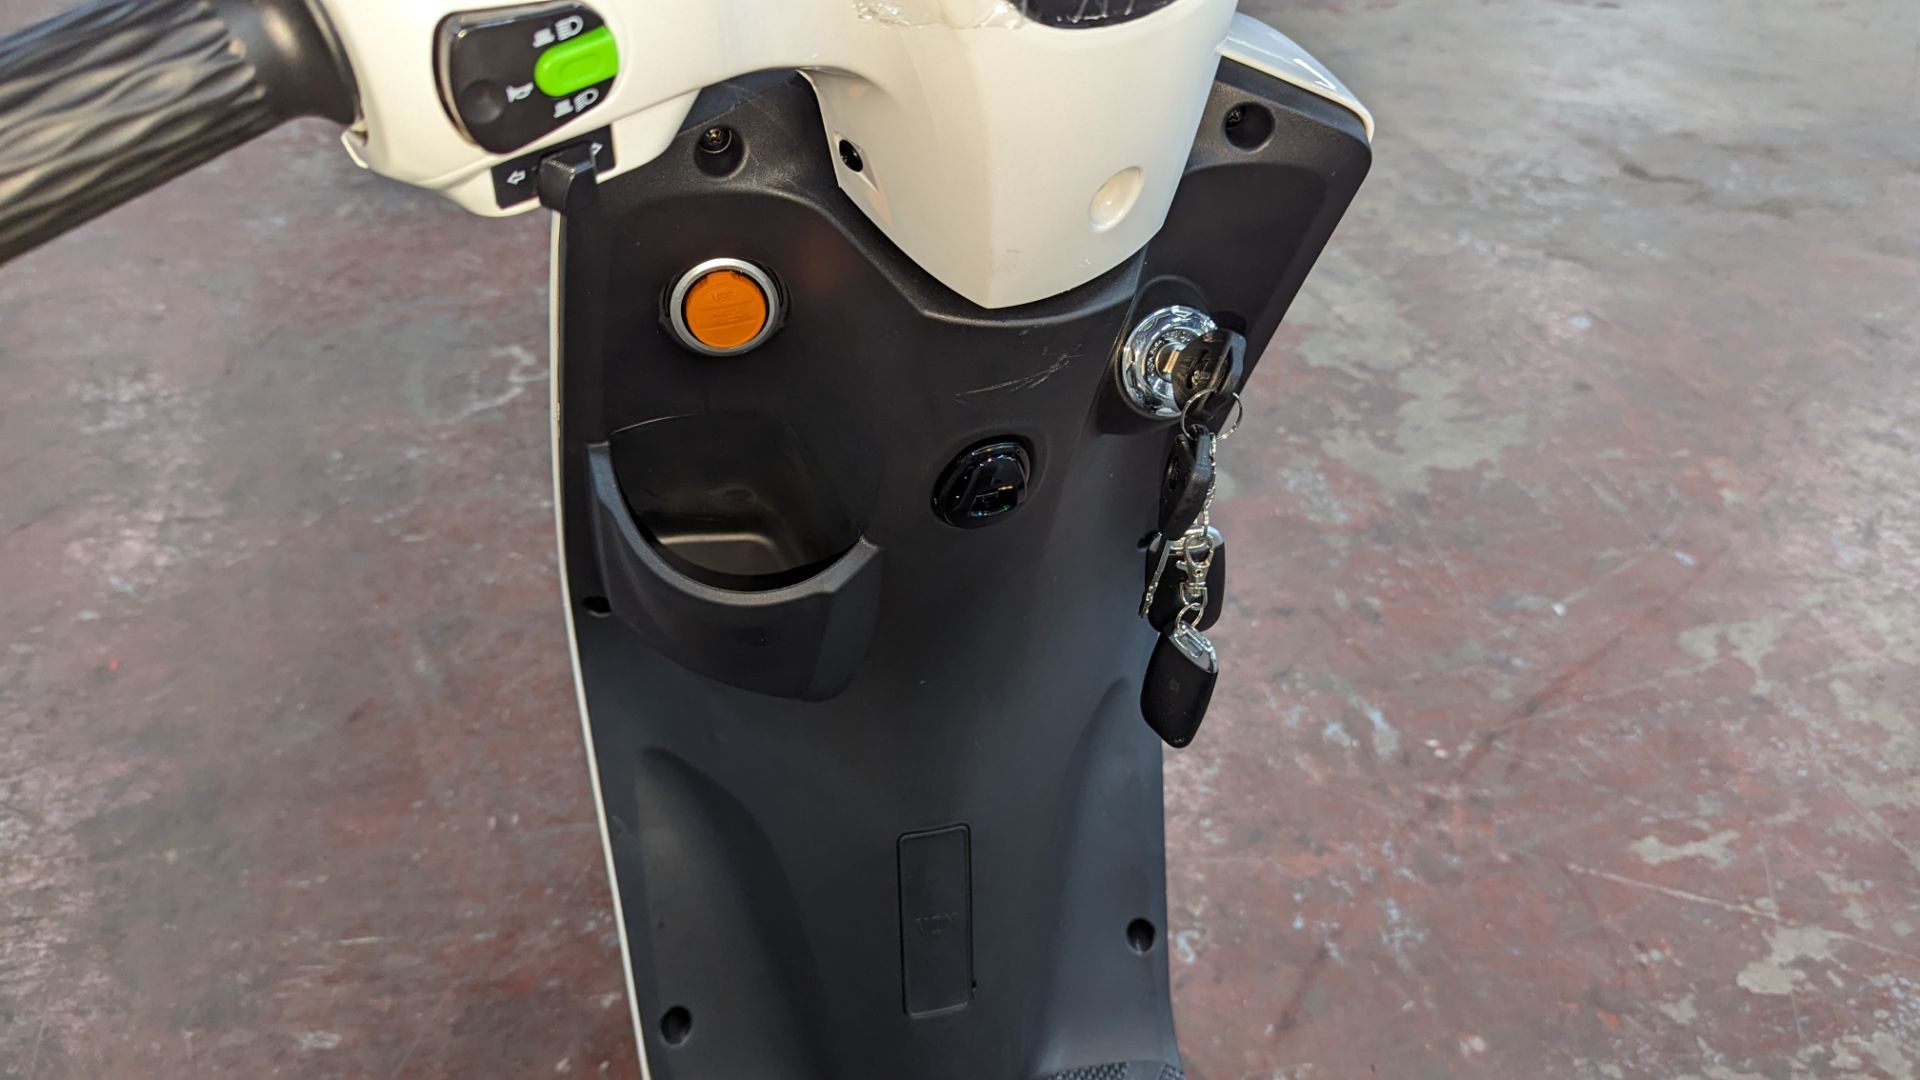 Model 18 Electric Bike: Zero (0) recorded miles, white body with black detailing, insulated box moun - Image 12 of 14